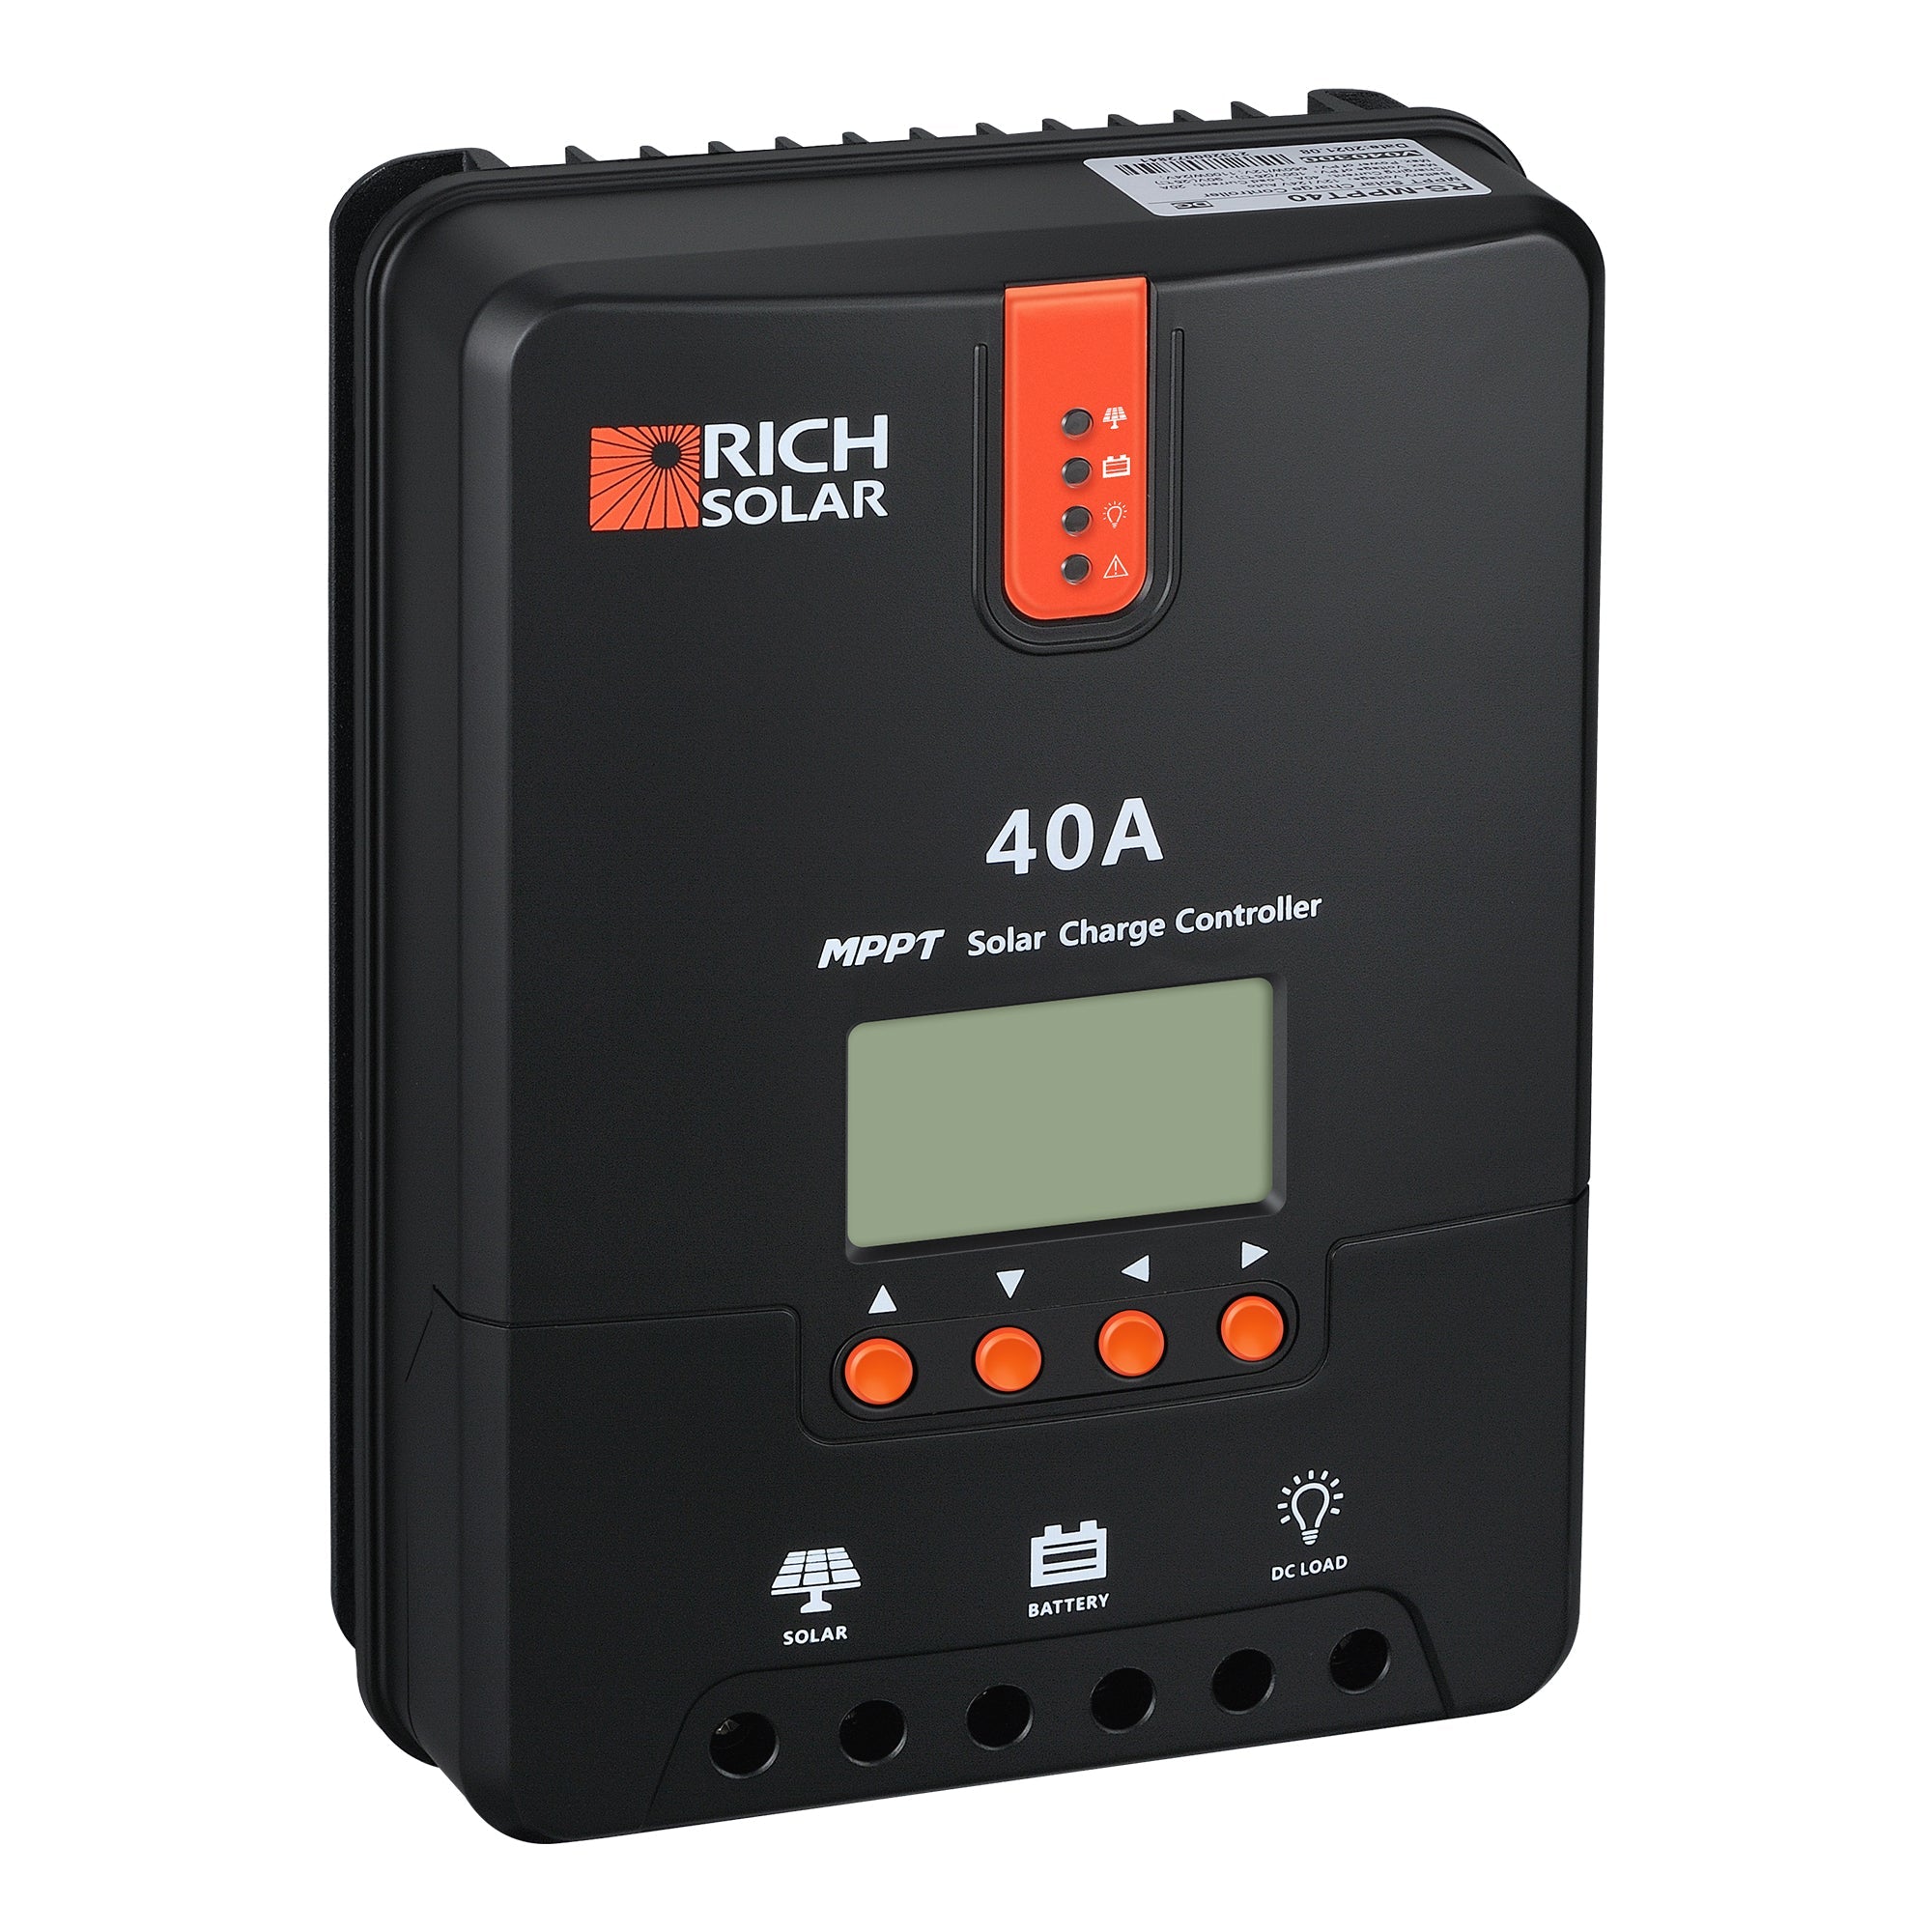 RICH SOLAR 40A MPPT Solar Charge Controller - Solar Generators and Power Stations Plus